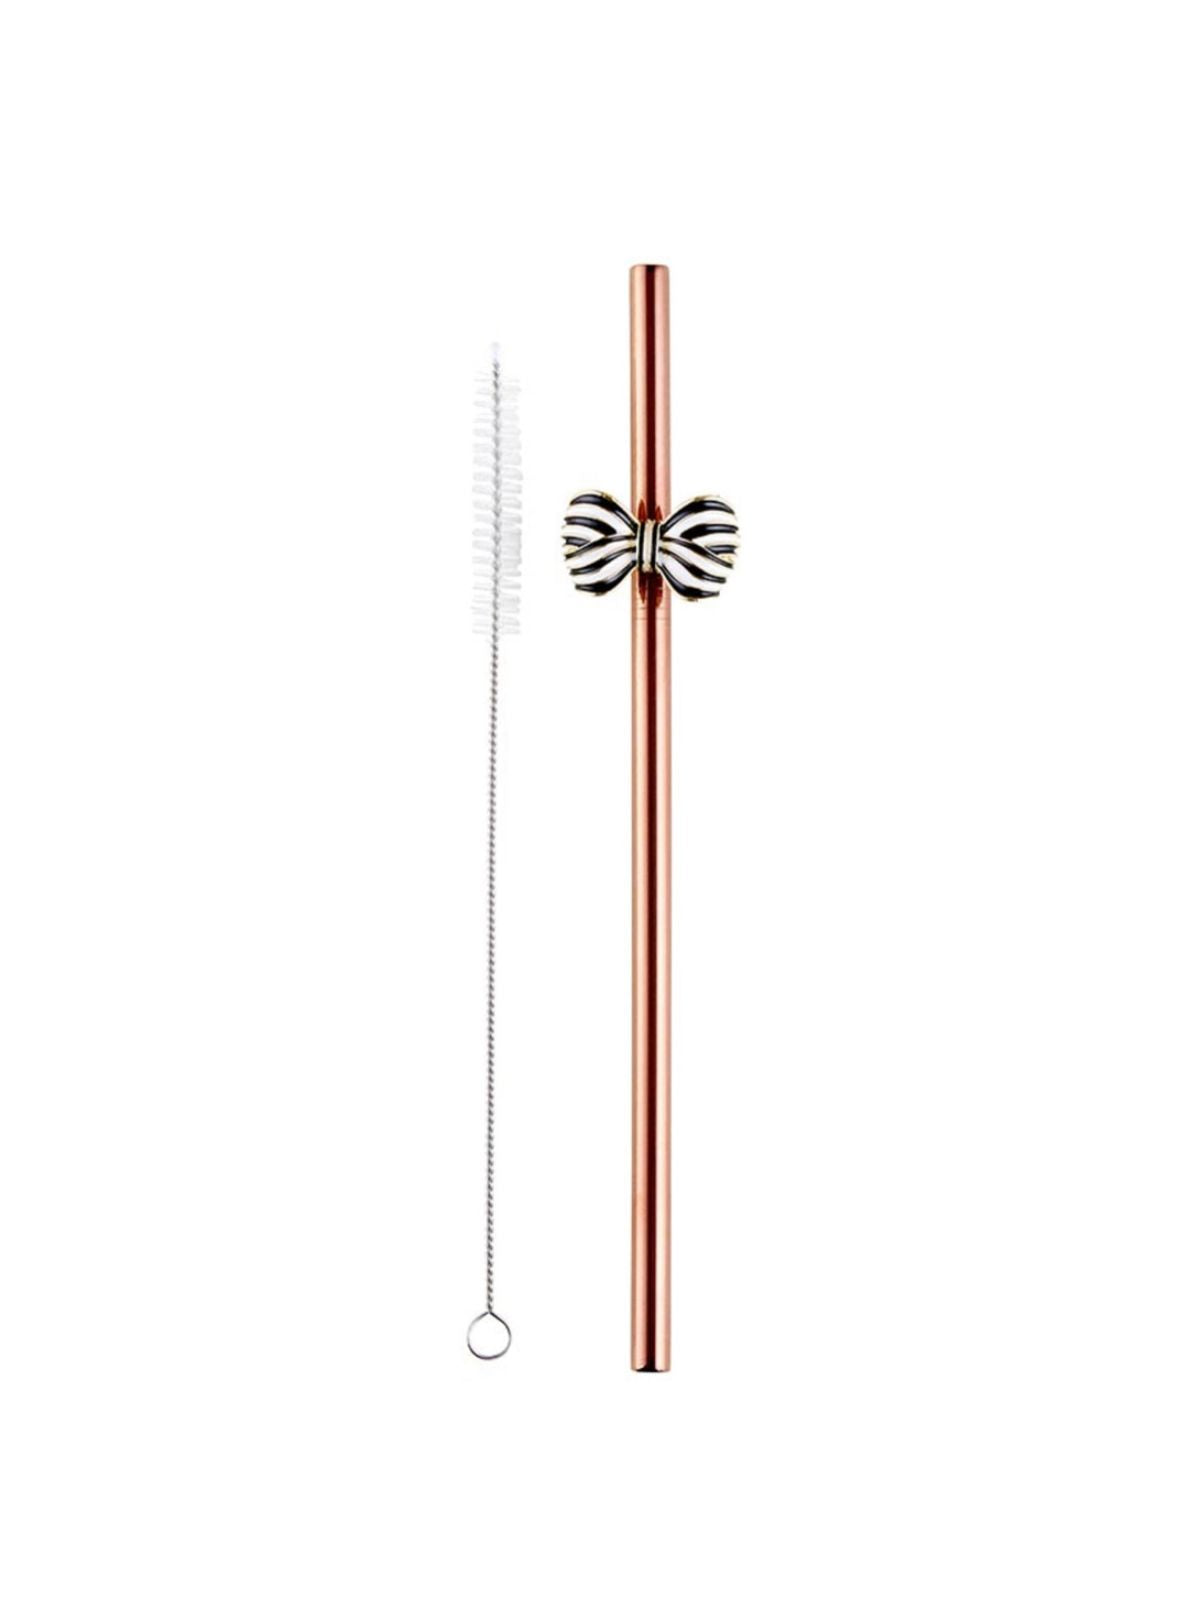 Sip in style AND save the turtles! This reusable stainless steel straw has a cute removable bow charm! Set includes 2 cleaning brush and 2 stainless steel straw with drawstring bag for easy storage. Sold by KYA Home Decor